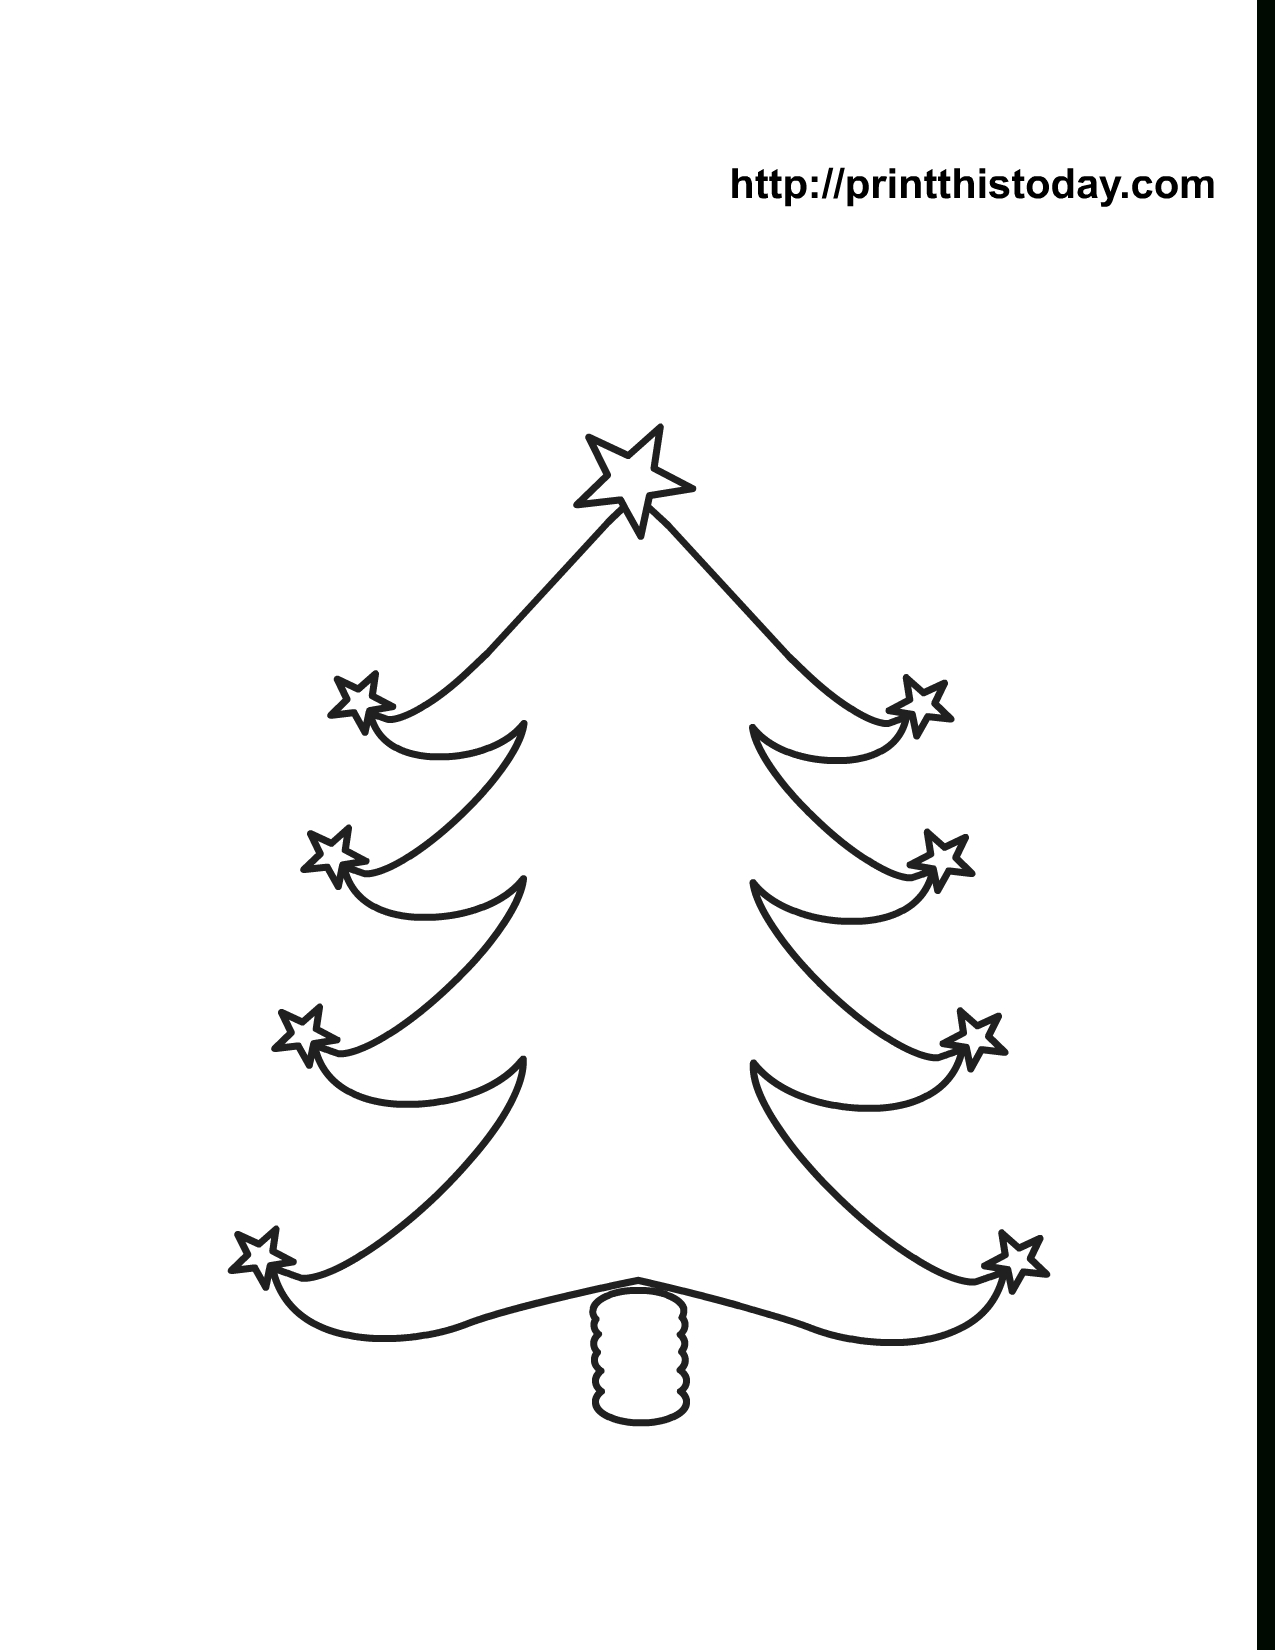 Free Printable Christmas Tree Coloring Pages - Free Printable Christmas Tree Ornaments Coloring Pages